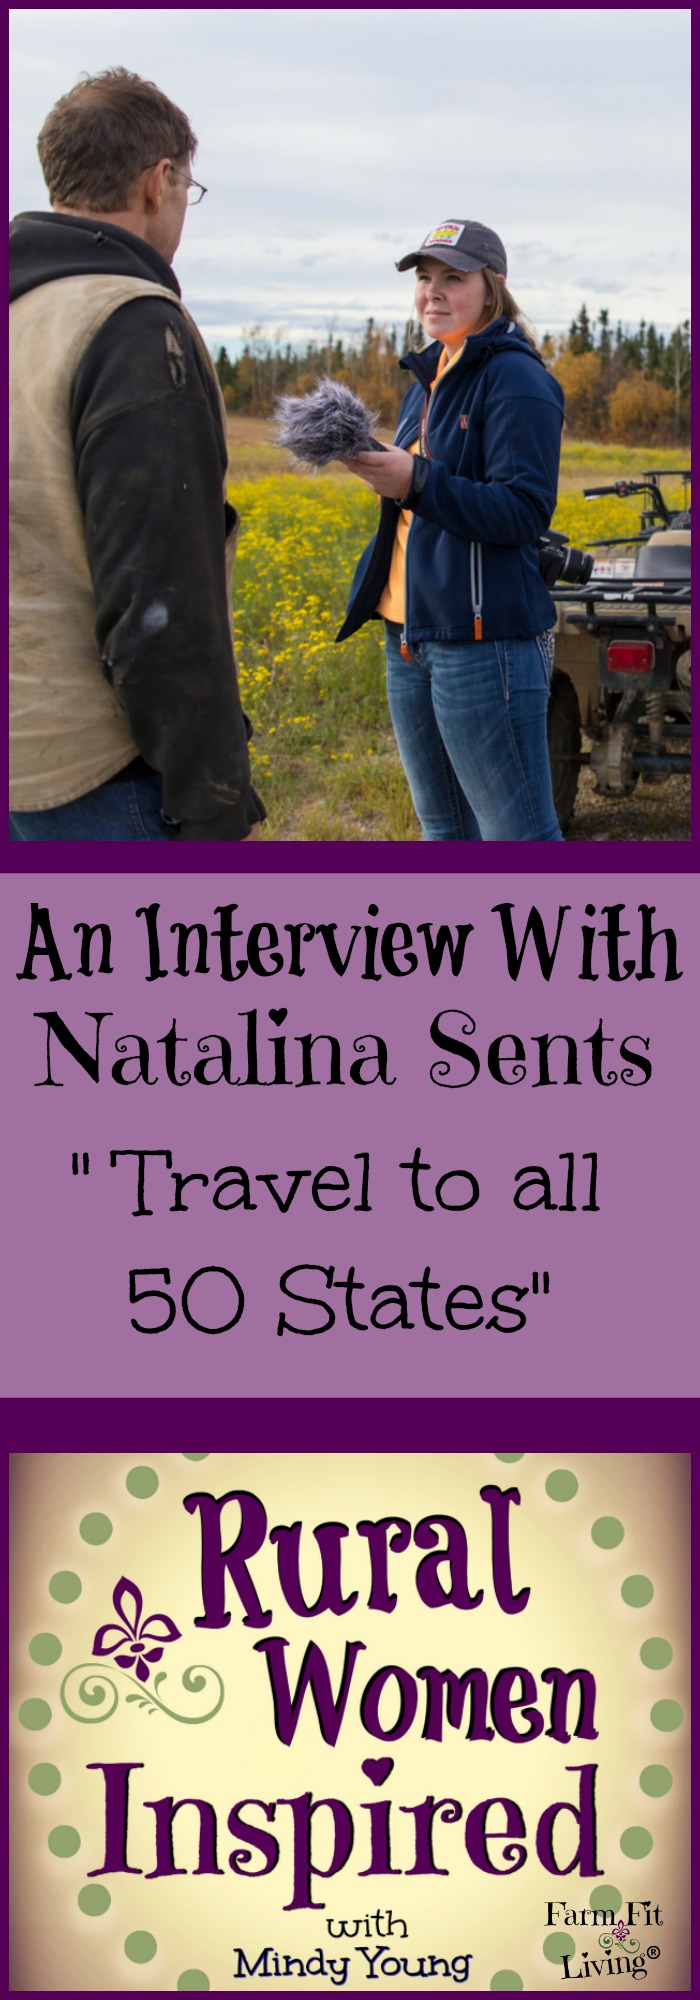 travel to all 50 states